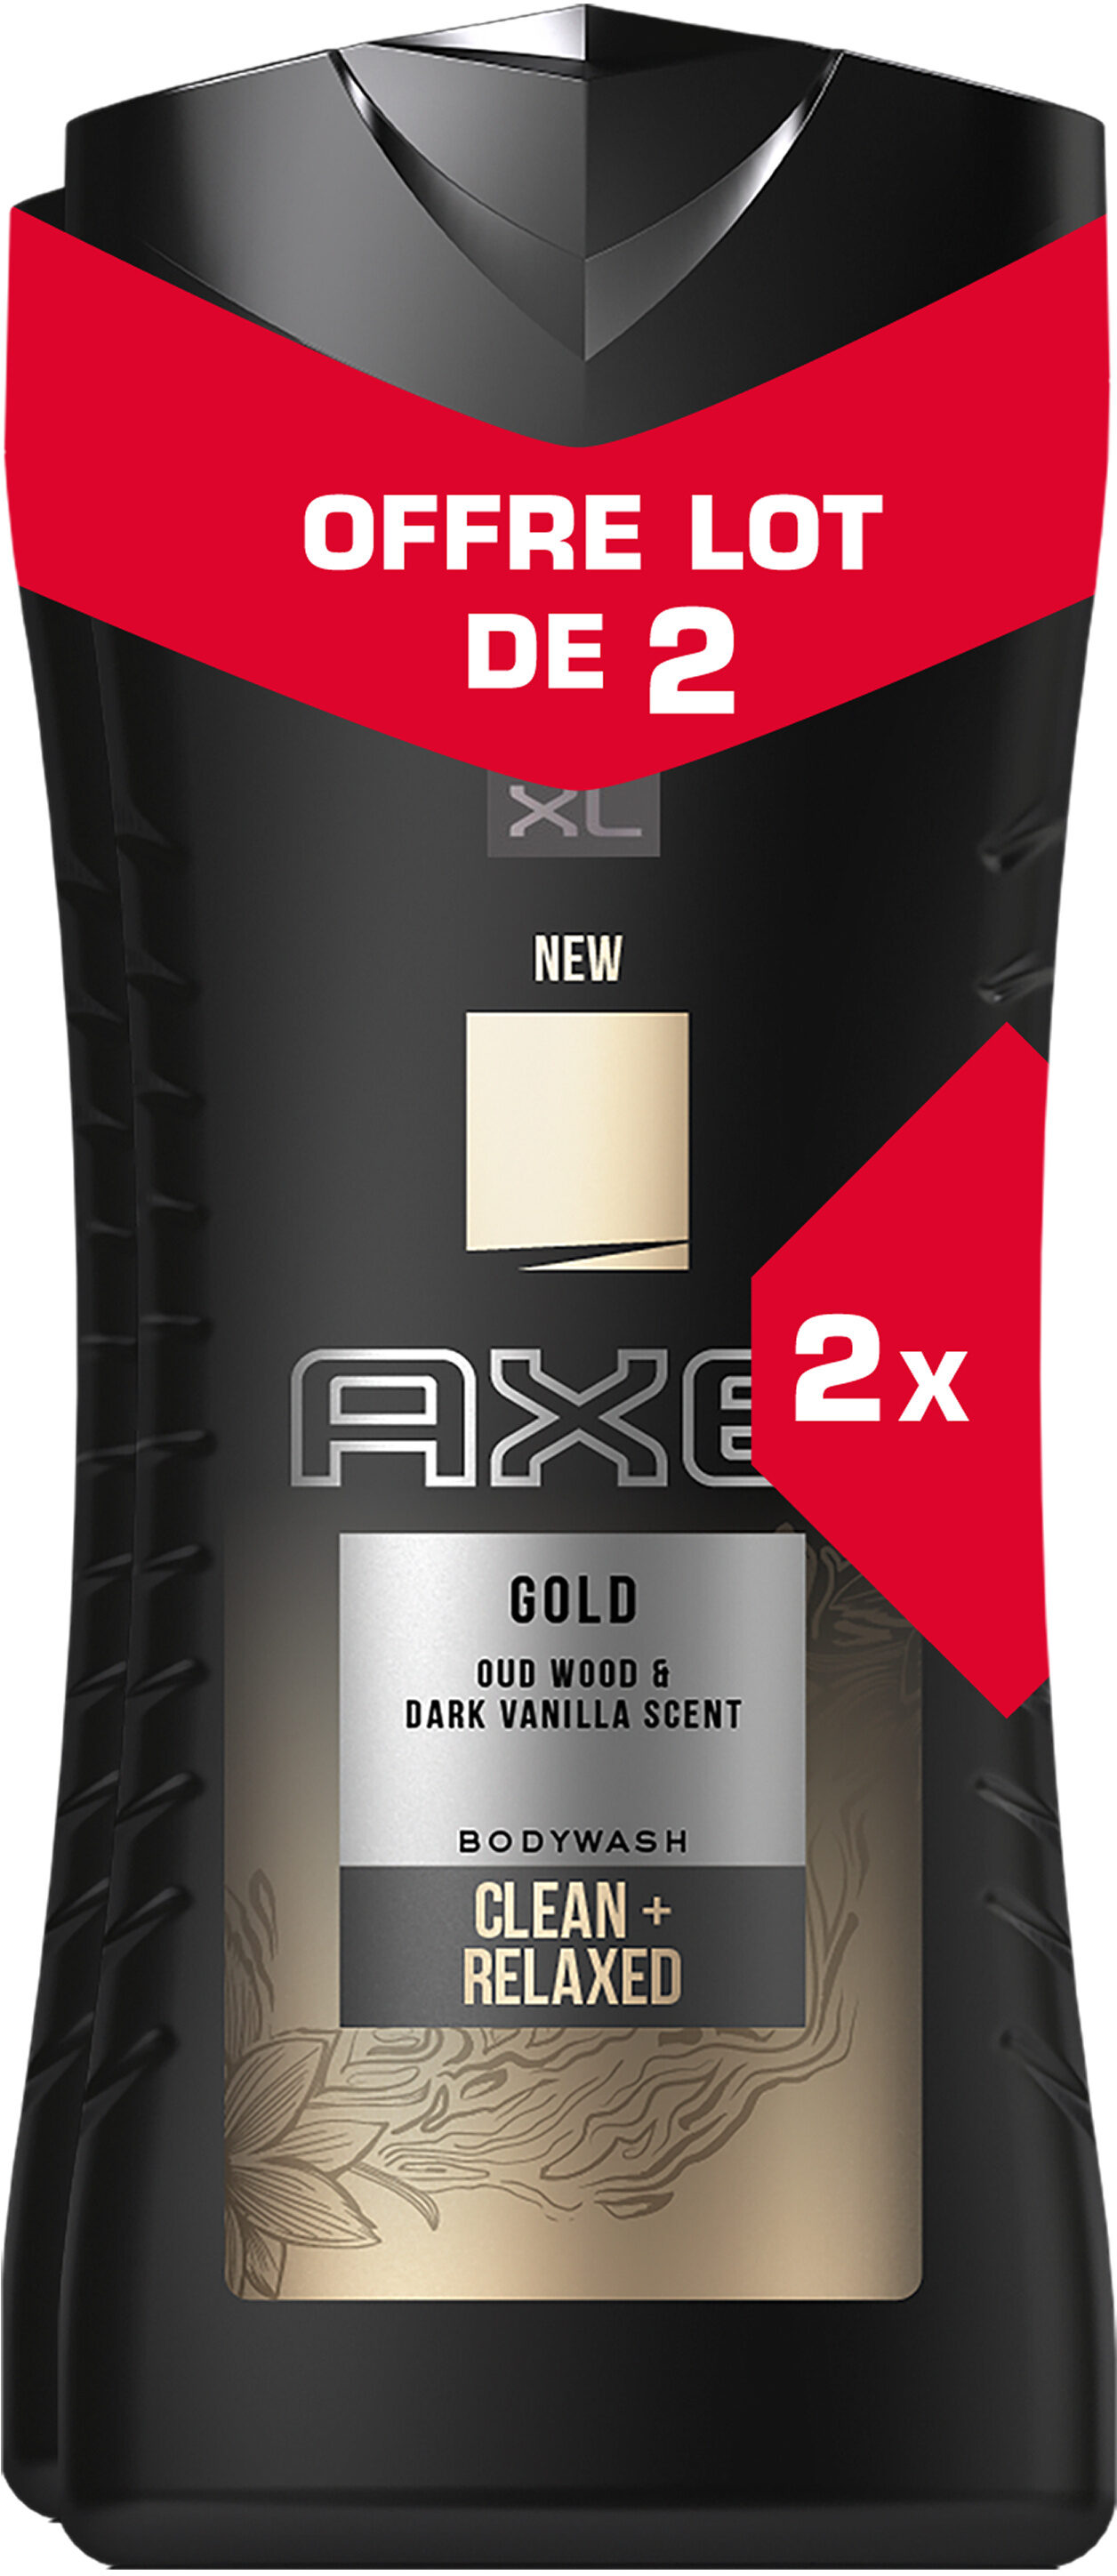 AXE Gel Douche Homme Gold Lot - Product - fr